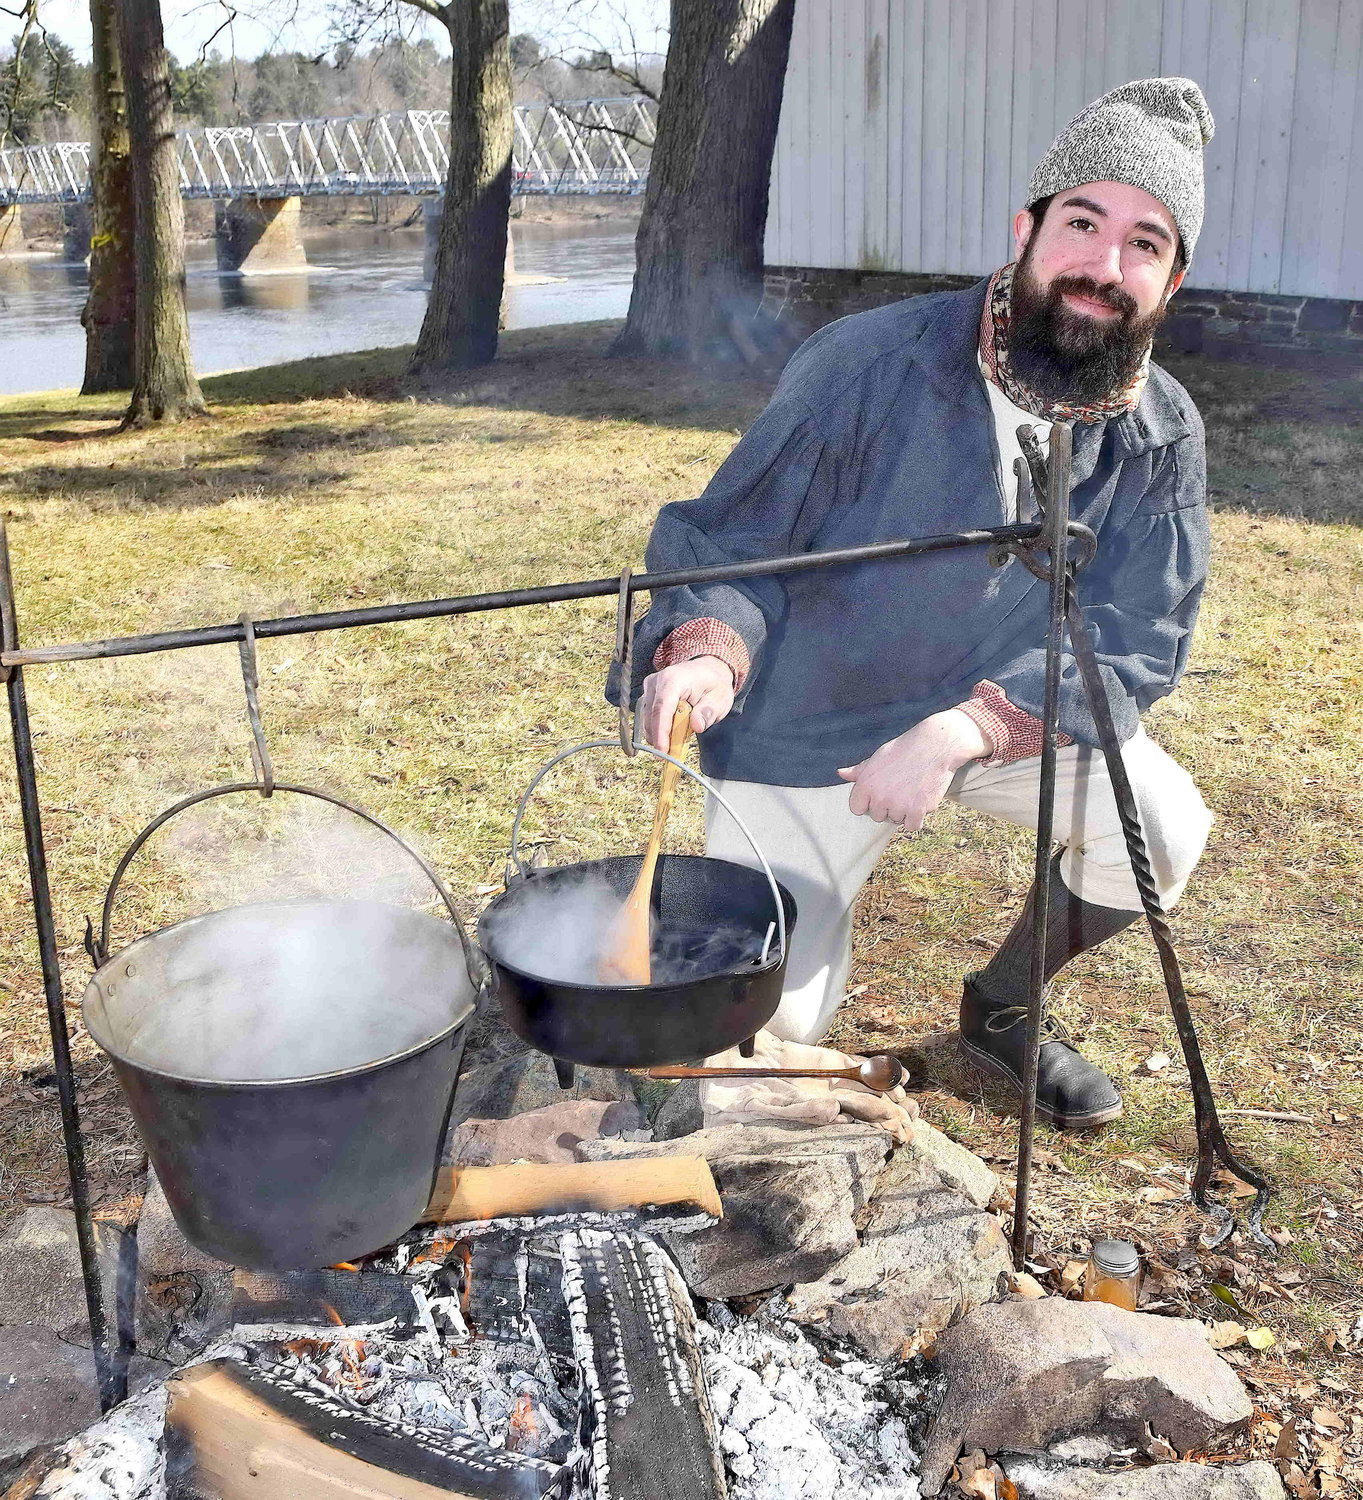 Ross Heutmaker demonstrates how to make maple syrup.